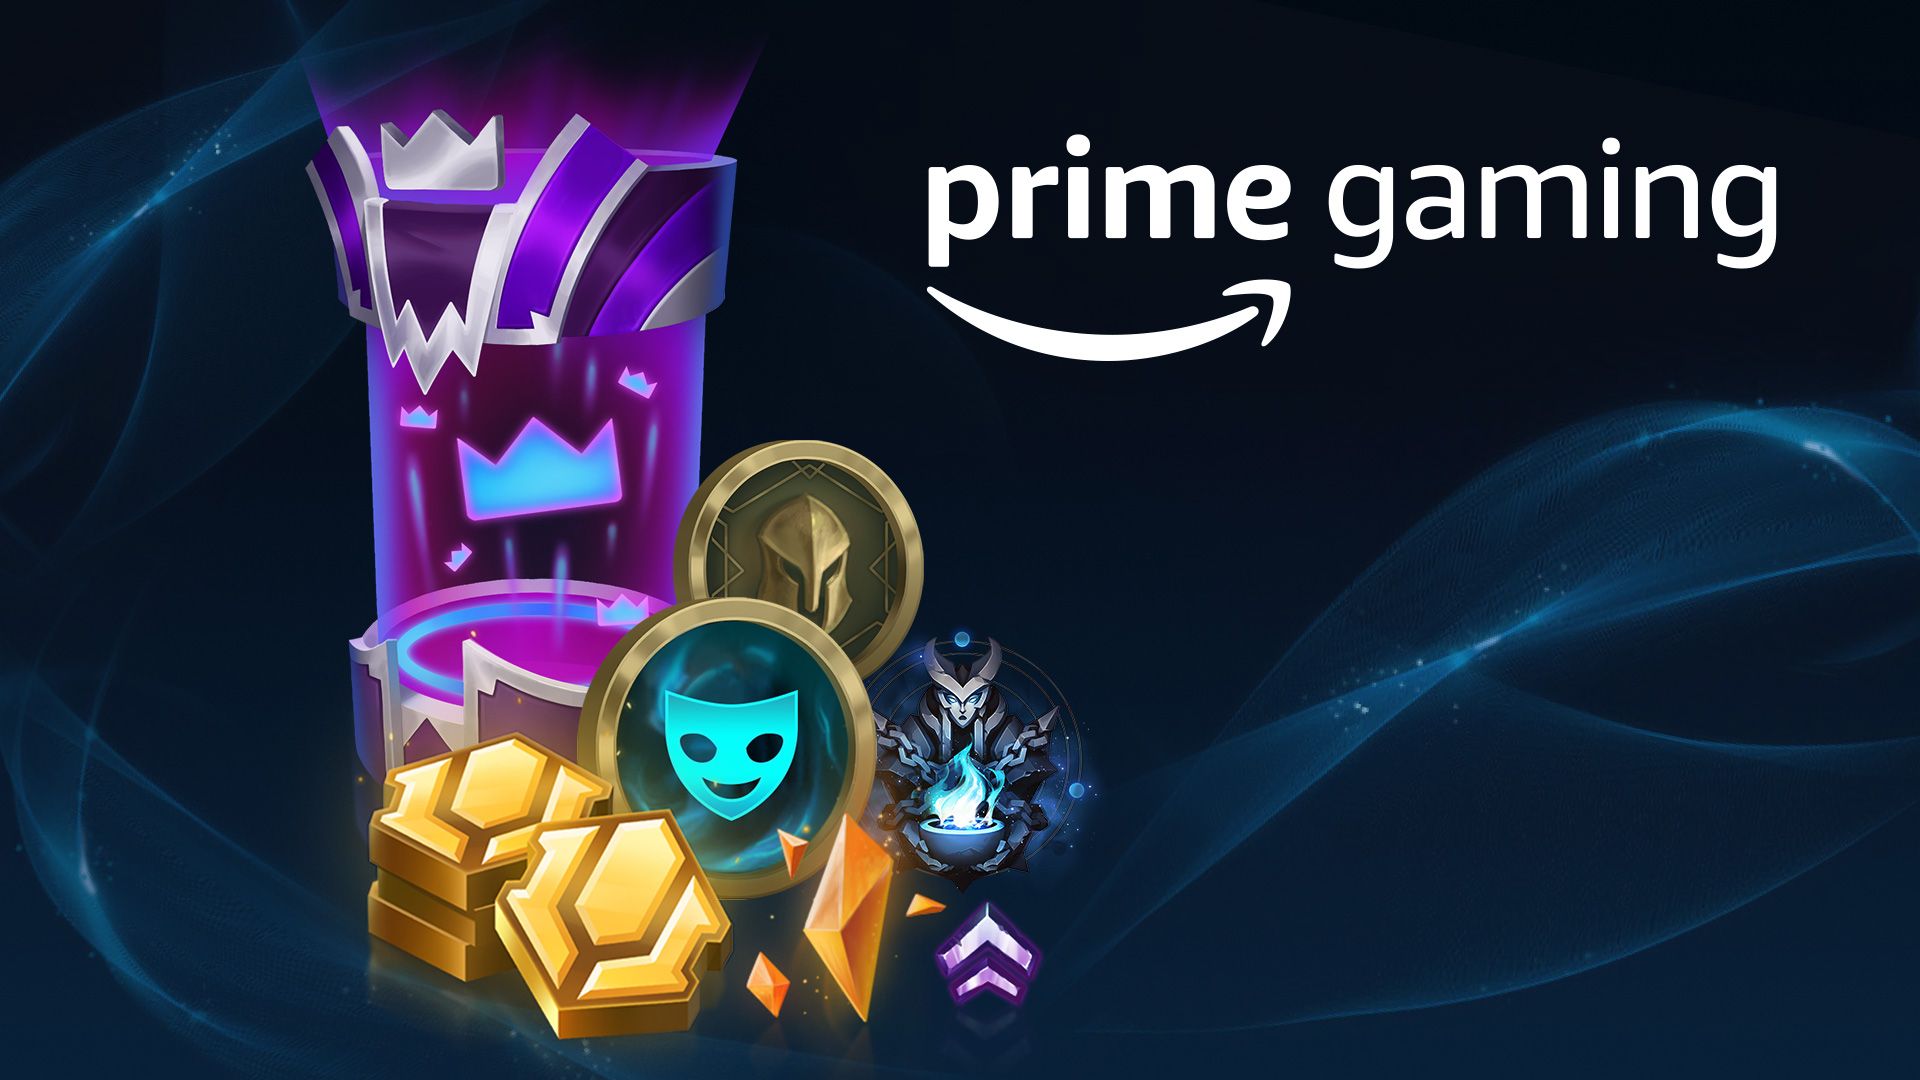 League of Legends Redeemable Rewards for Prime Gaming 